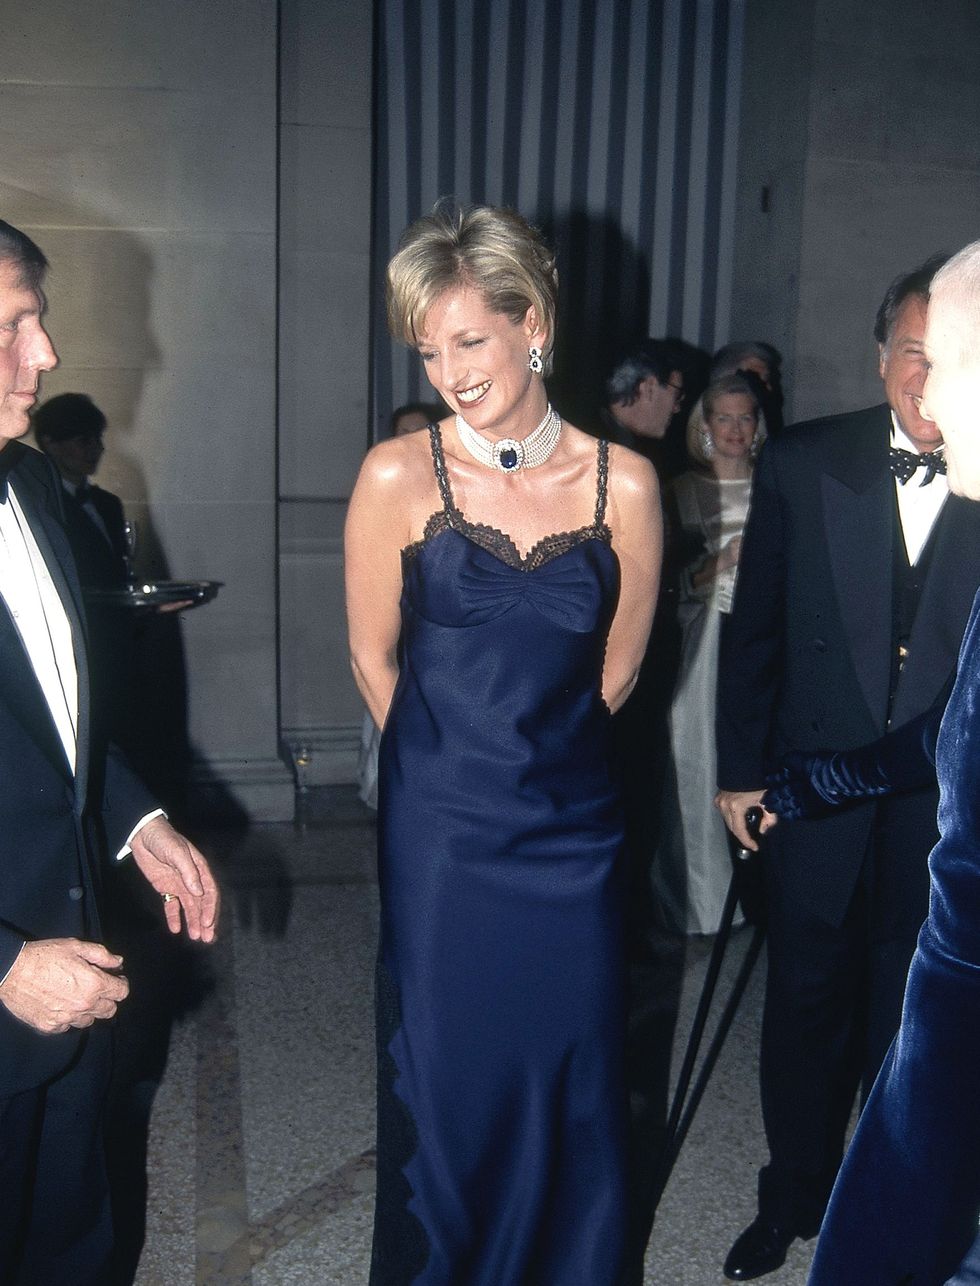 new york, ny   january 01 princess diana attends met gala at metropolitan museum of art on january 1, 1995 in new york city photo by patrick mcmullanpatrick mcmullan via getty images